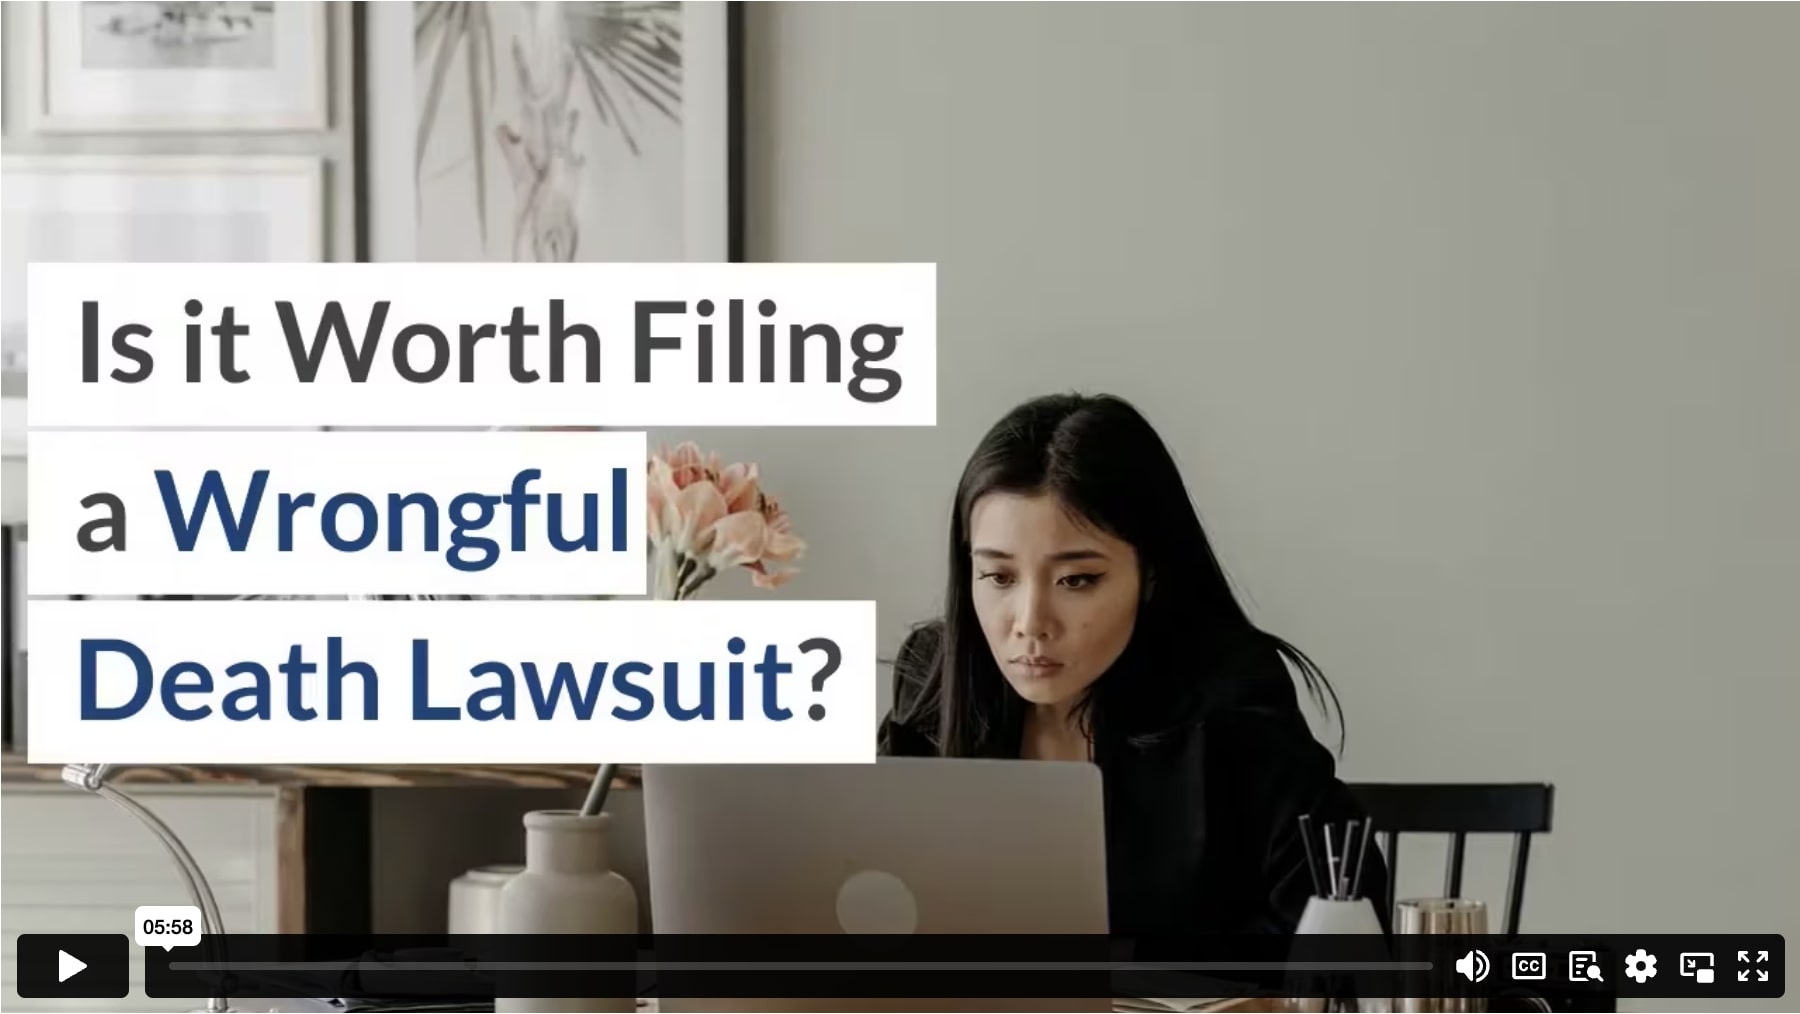 Is it Worth Filing a Wrongful Death Lawsuit?